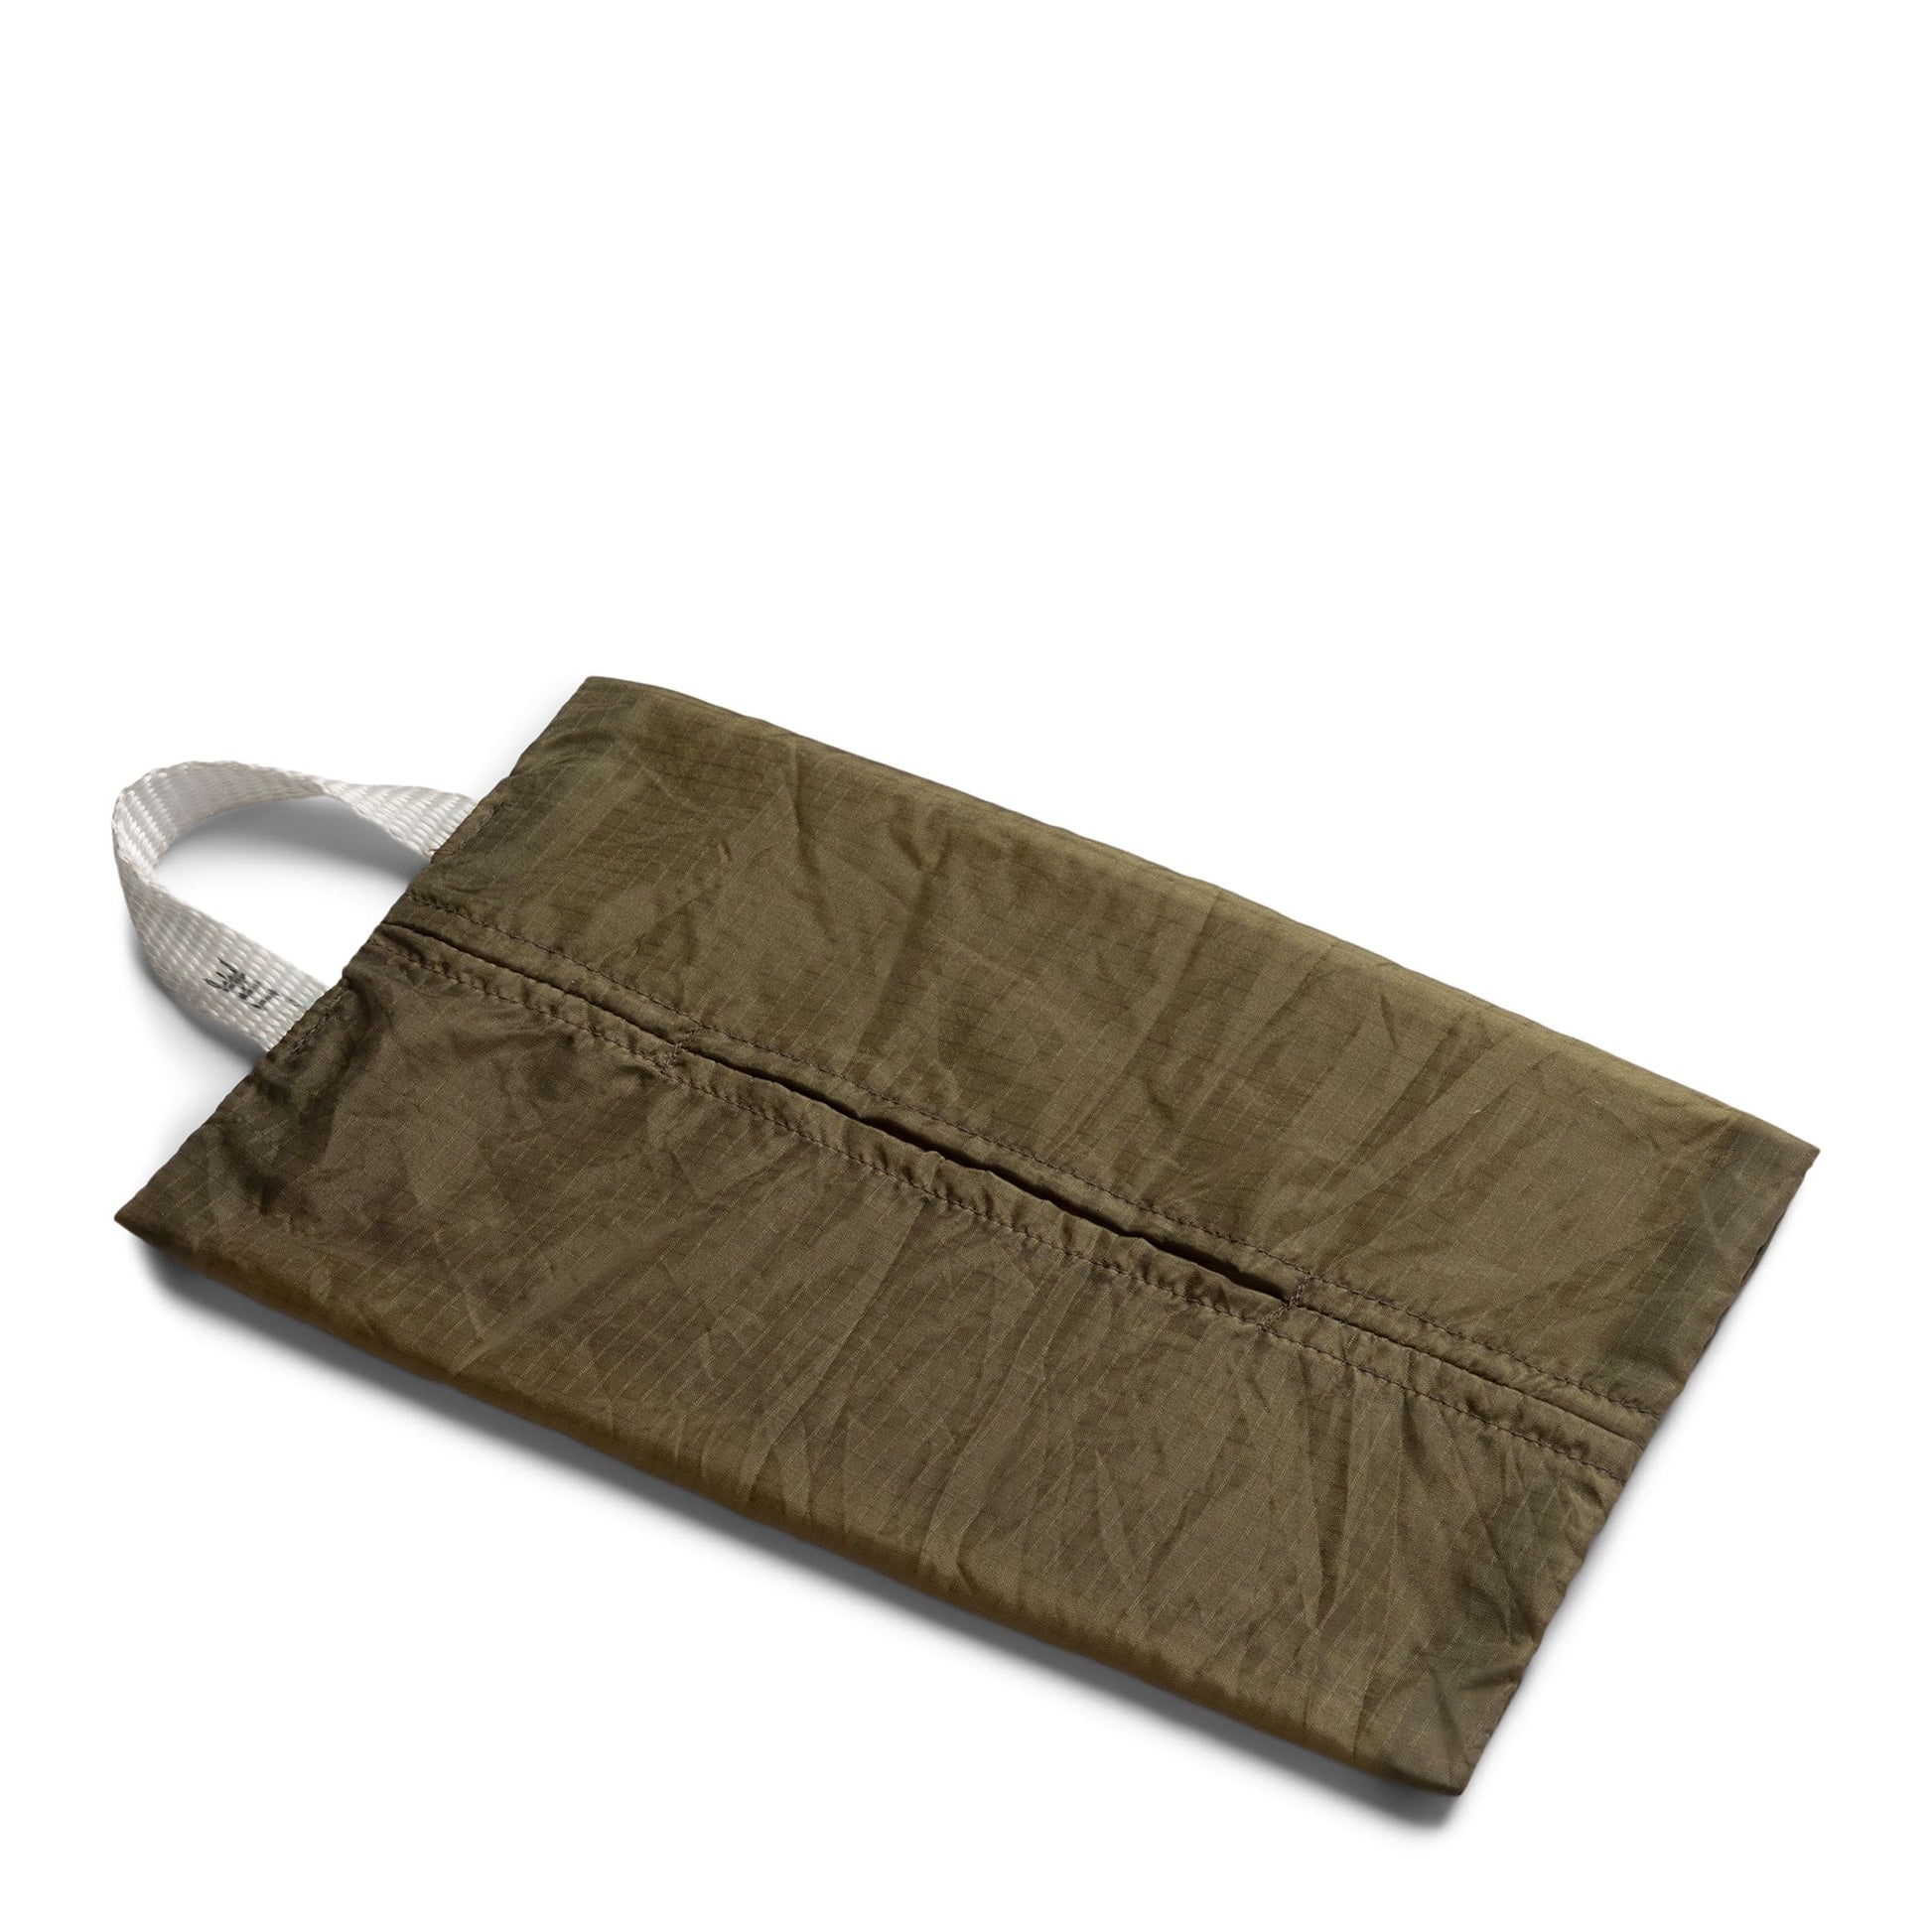 PUEBCO OLIVE / O/S VINTAGE PARACHUTE TISSUE COVER